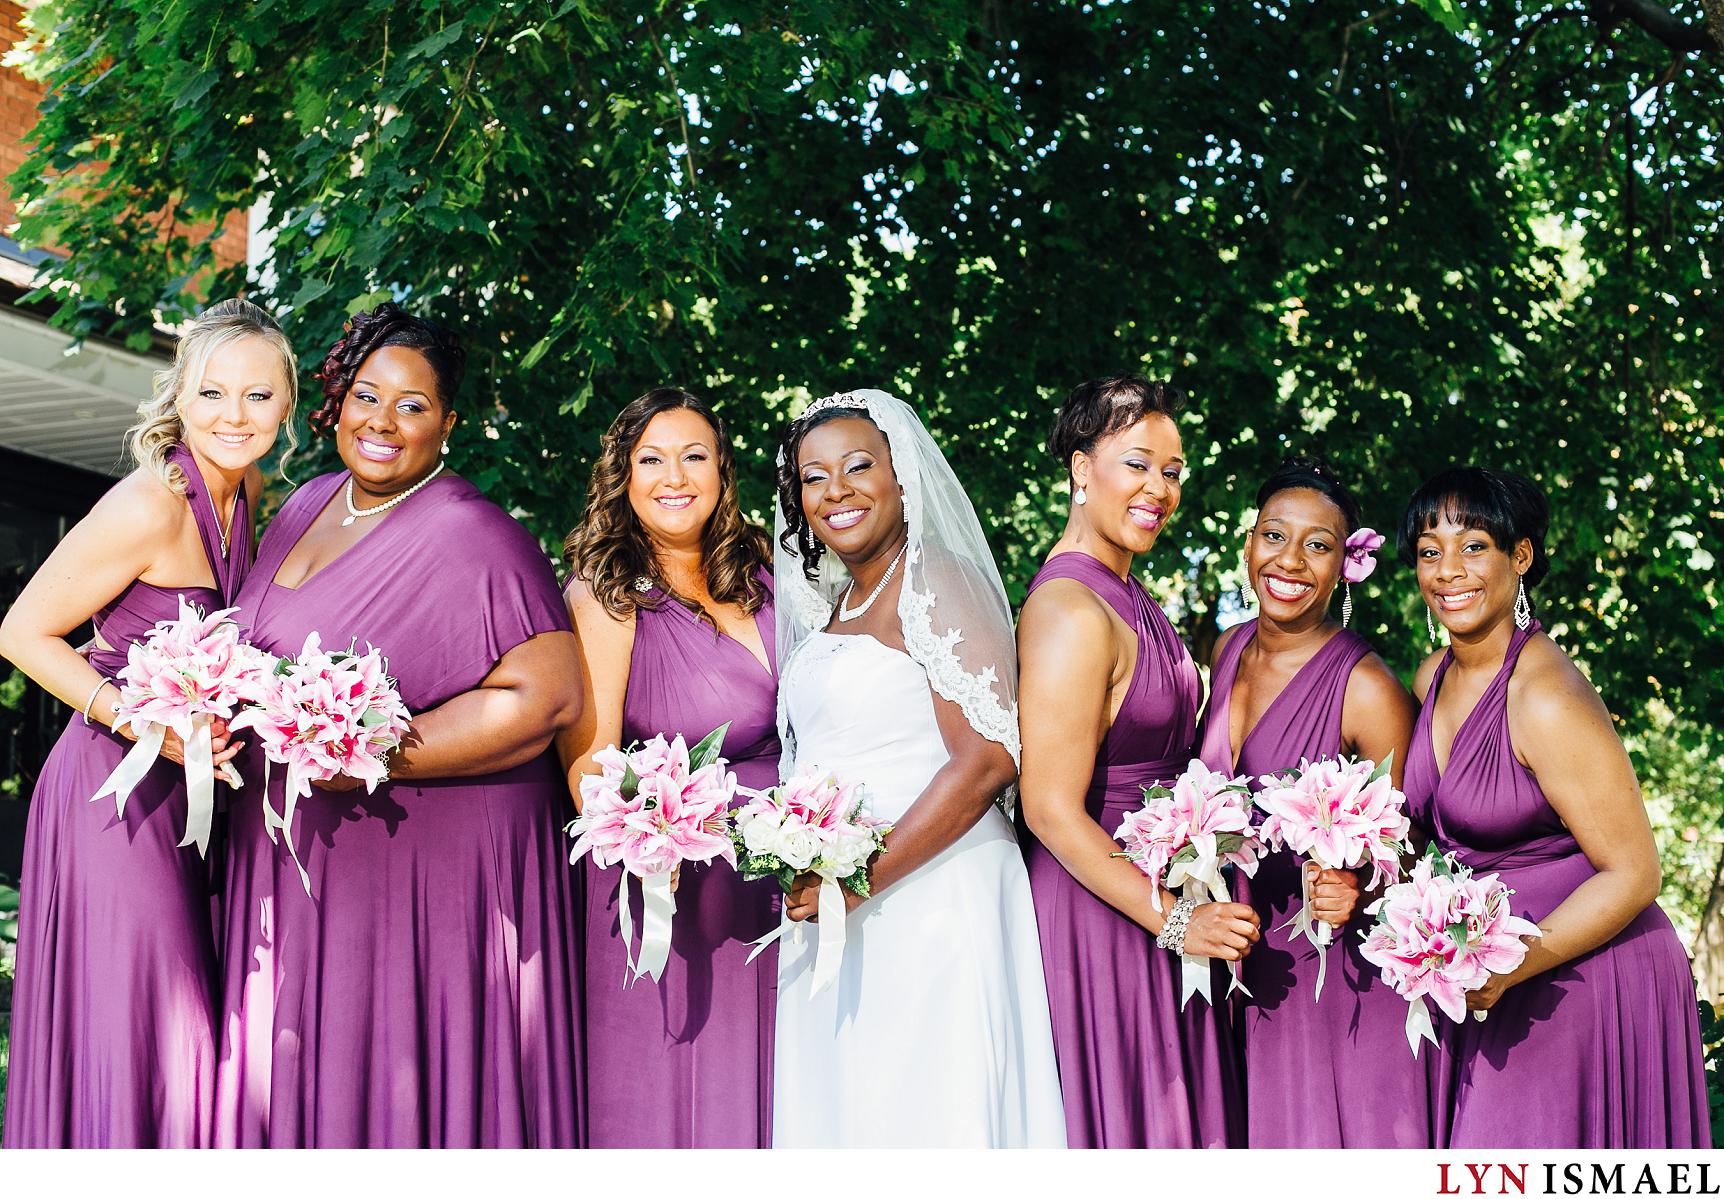 Bridesmaids wearing purple dresses and holding bouquets made of lilies